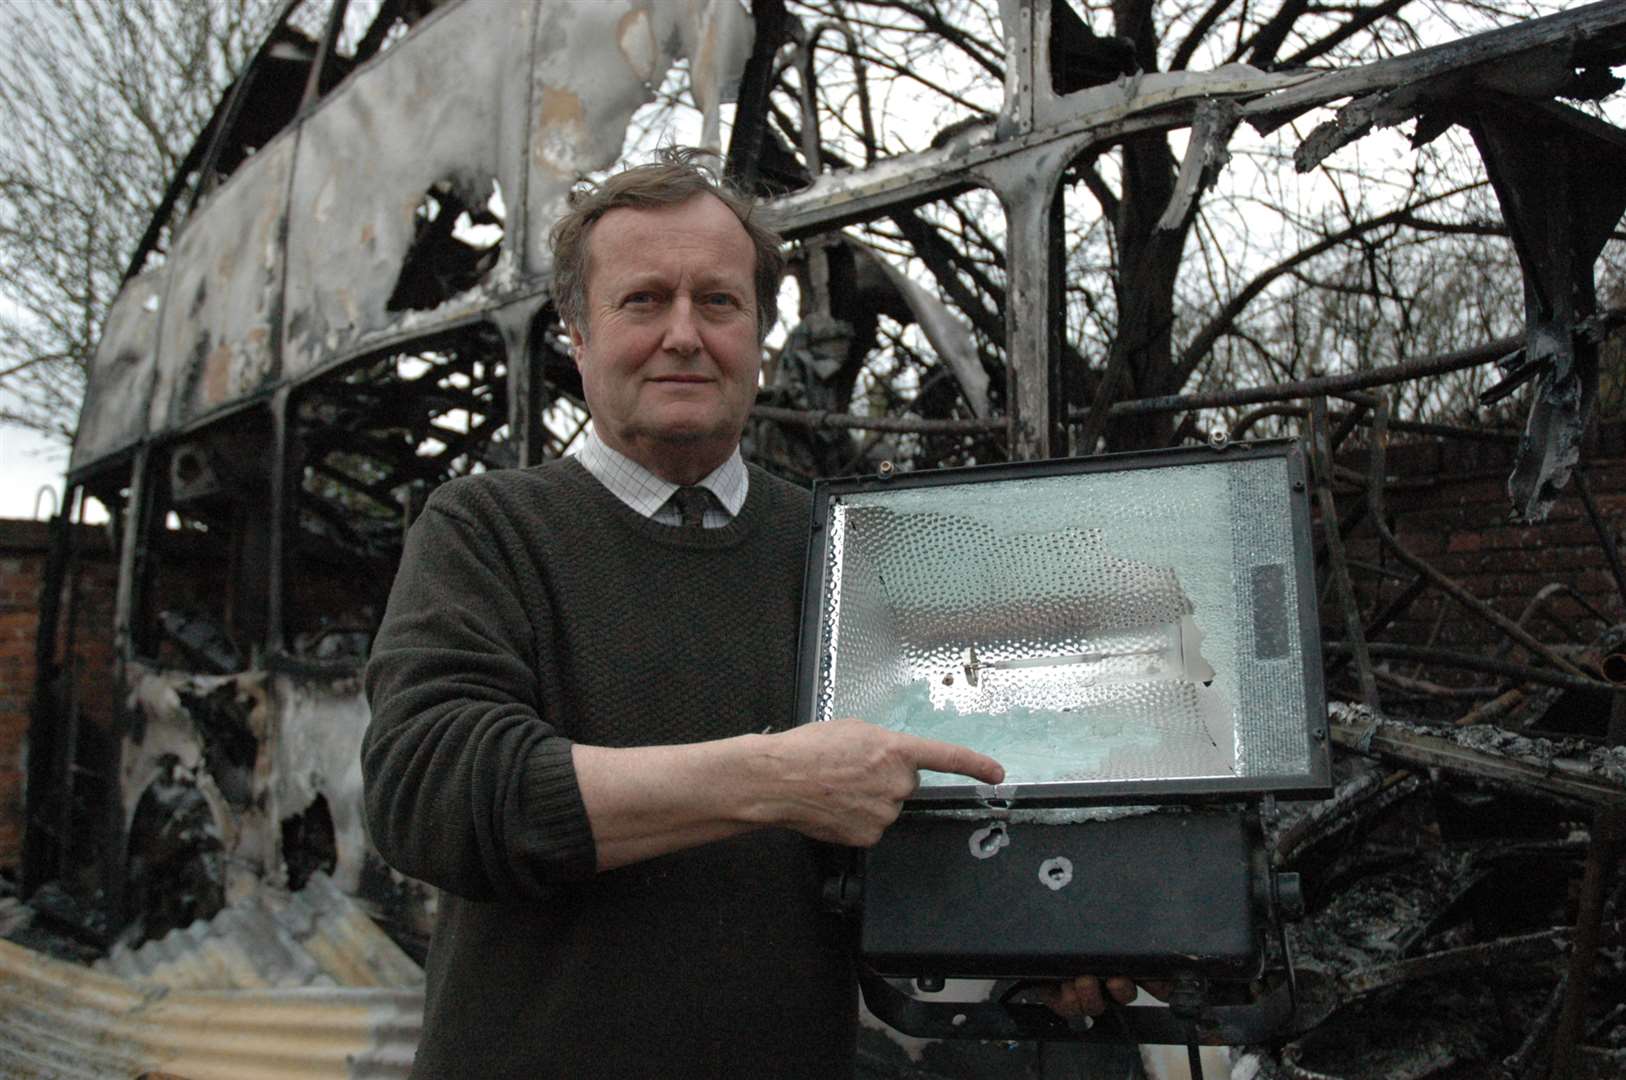 Morghew Park owner Tom Lewis holds a security light damaged in a previous vandalism shooting at the premises